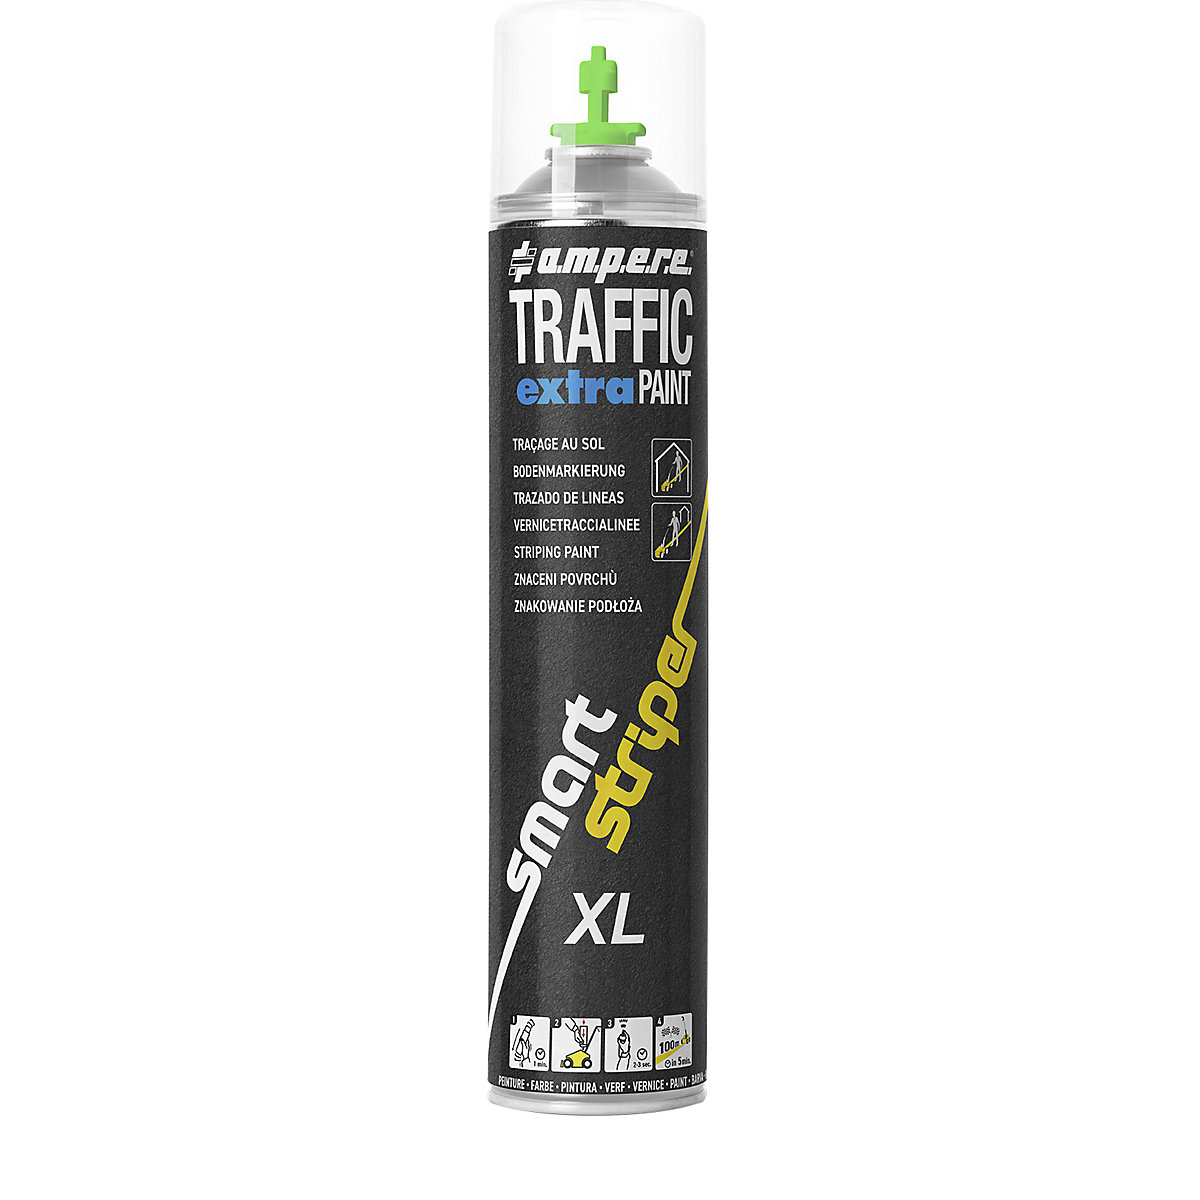 Traffic extra Paint® XL marking paint – Ampere, contents 750 ml, pack of 6, green-2